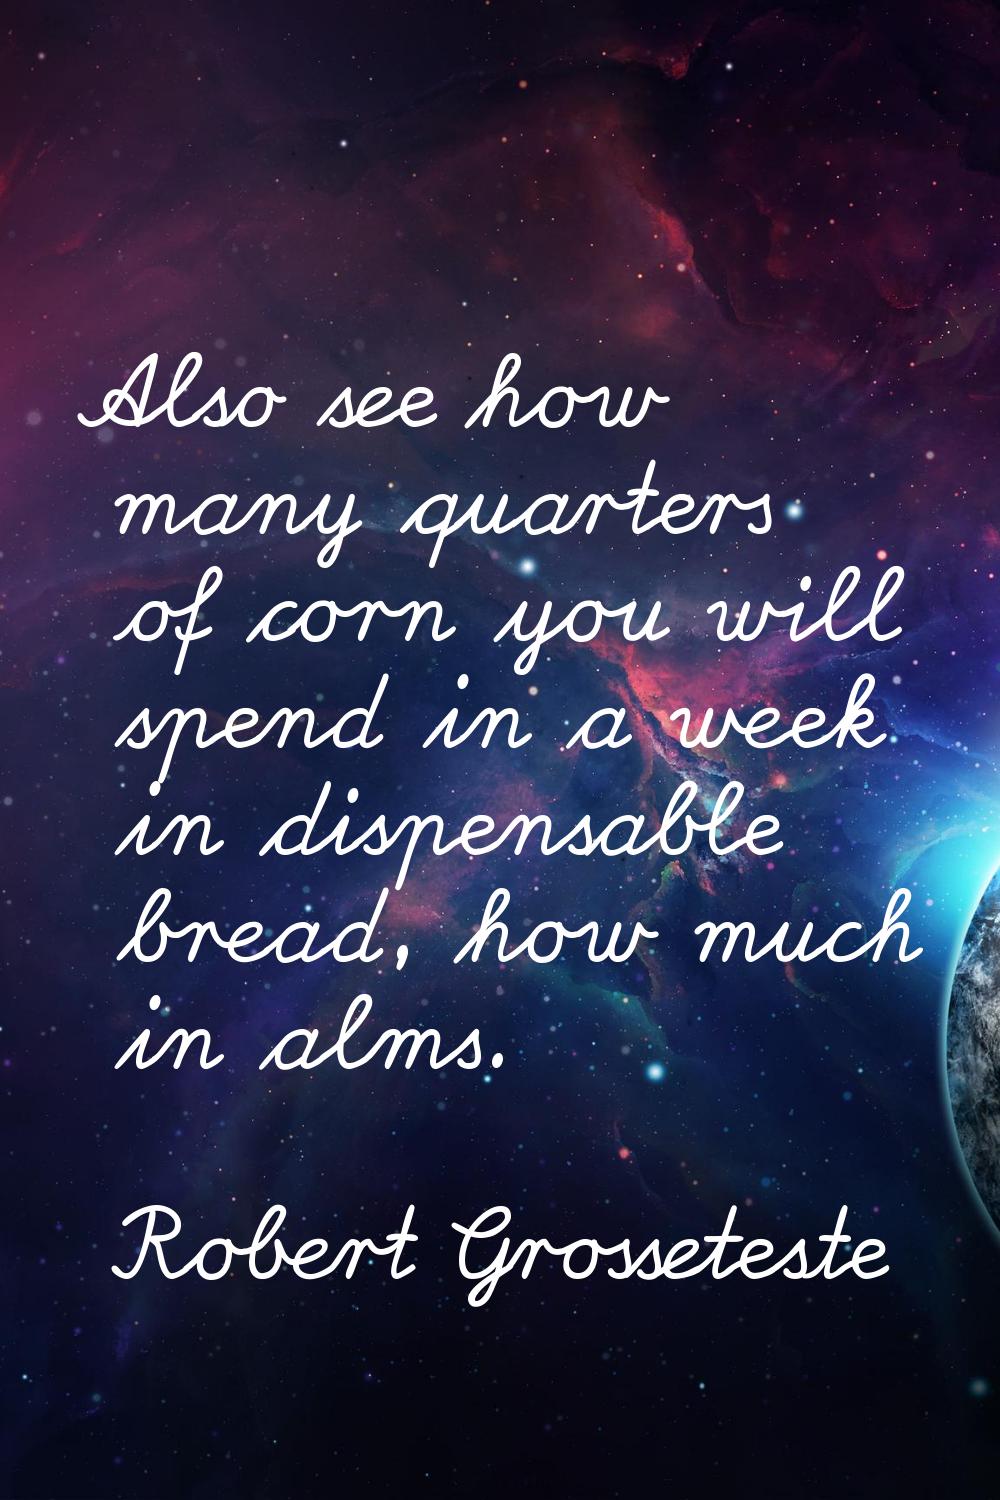 Also see how many quarters of corn you will spend in a week in dispensable bread, how much in alms.